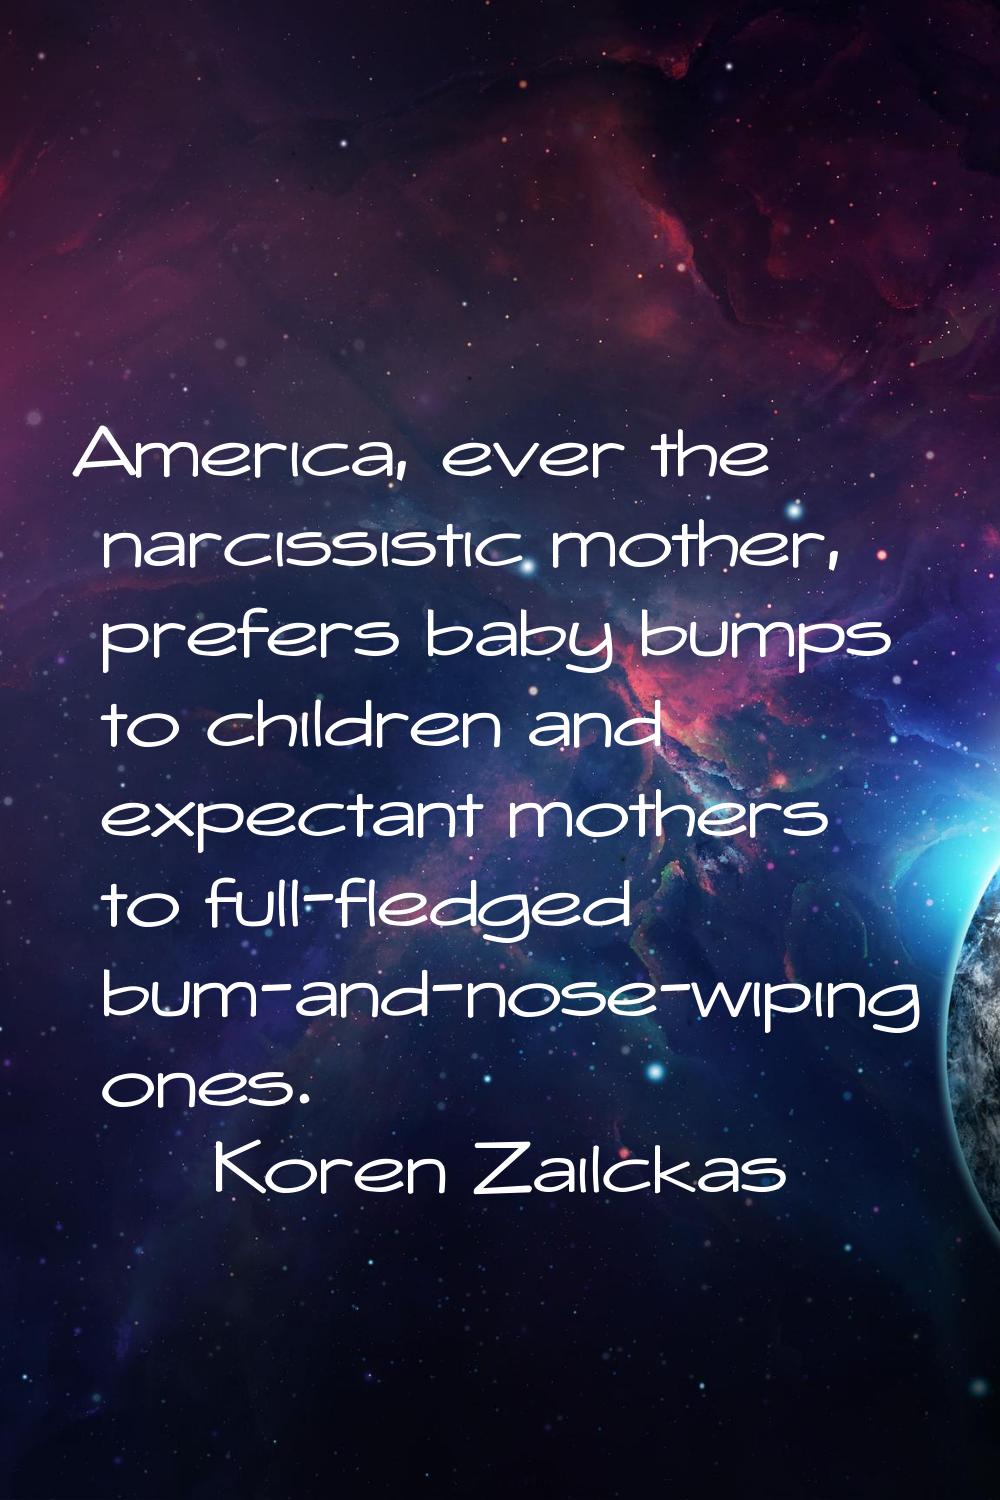 America, ever the narcissistic mother, prefers baby bumps to children and expectant mothers to full